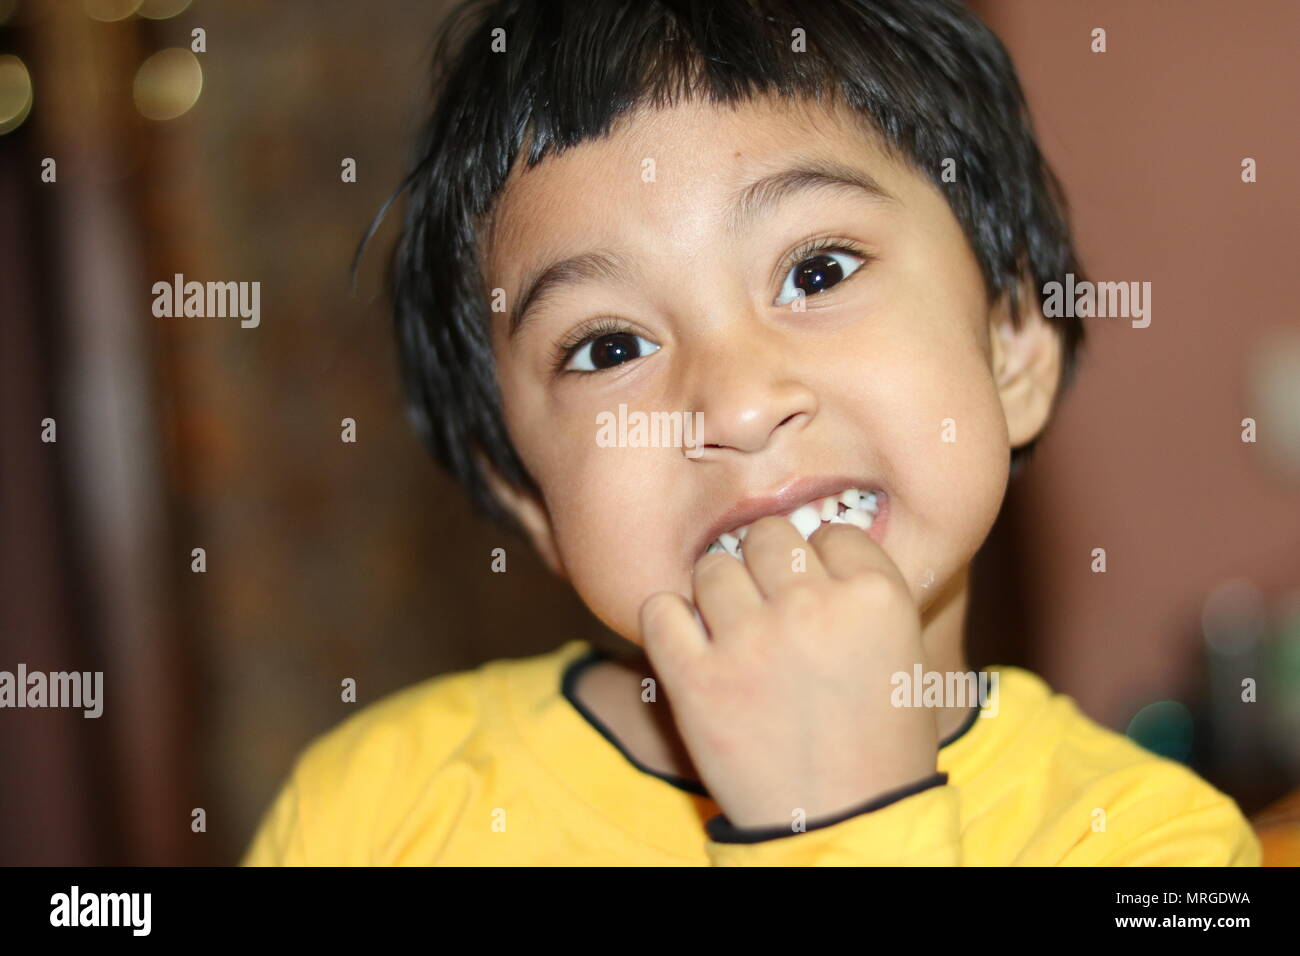 cute Indian kids with a smile on face Stock Photo